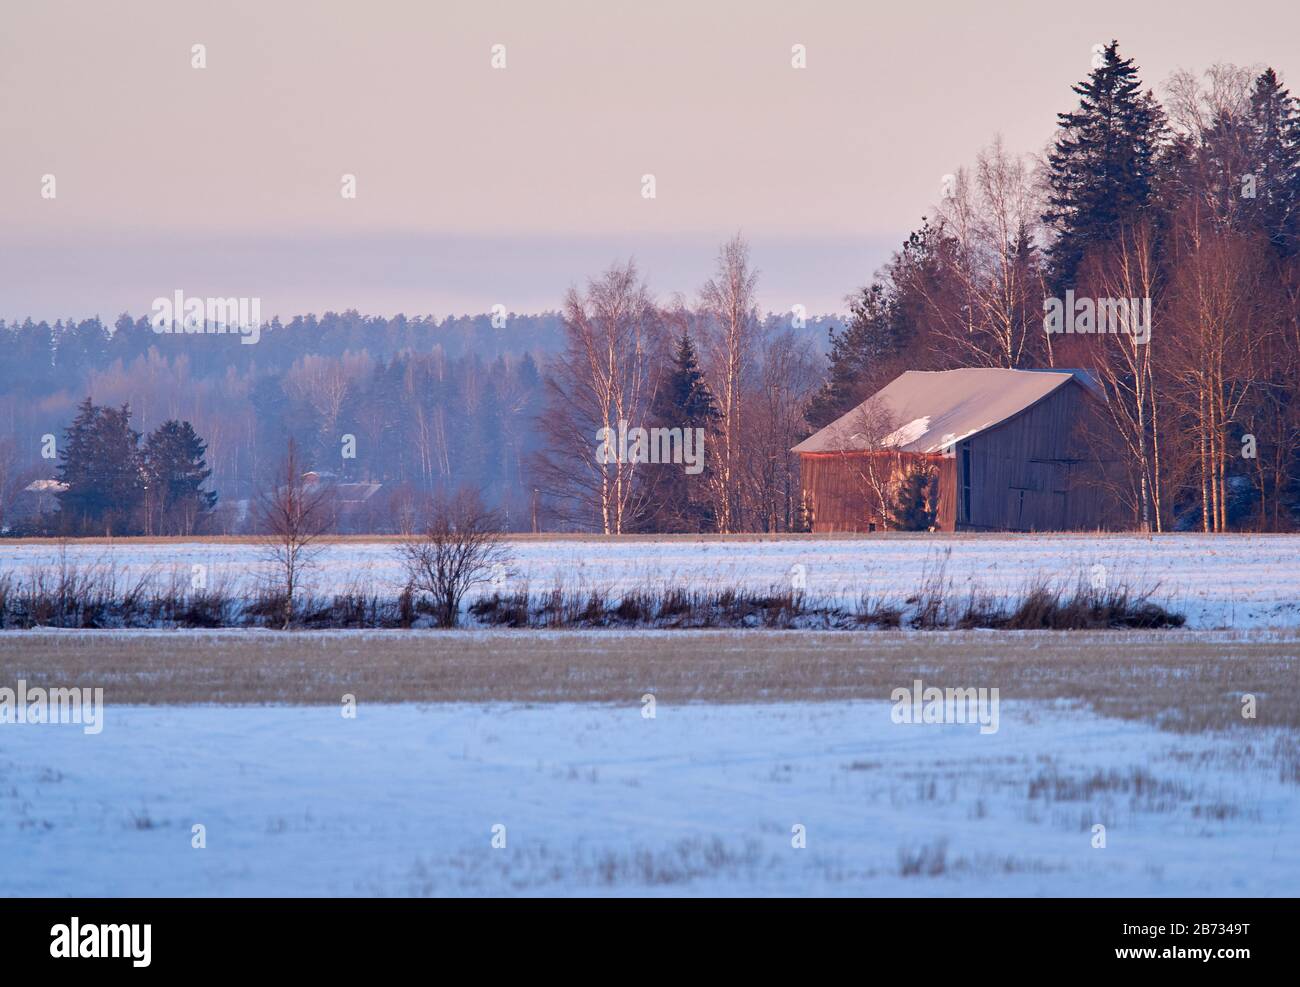 Countryside scenery with old barn and snow on the field. Very calm and peaceful atmosphere of cold day in winter. Stock Photo